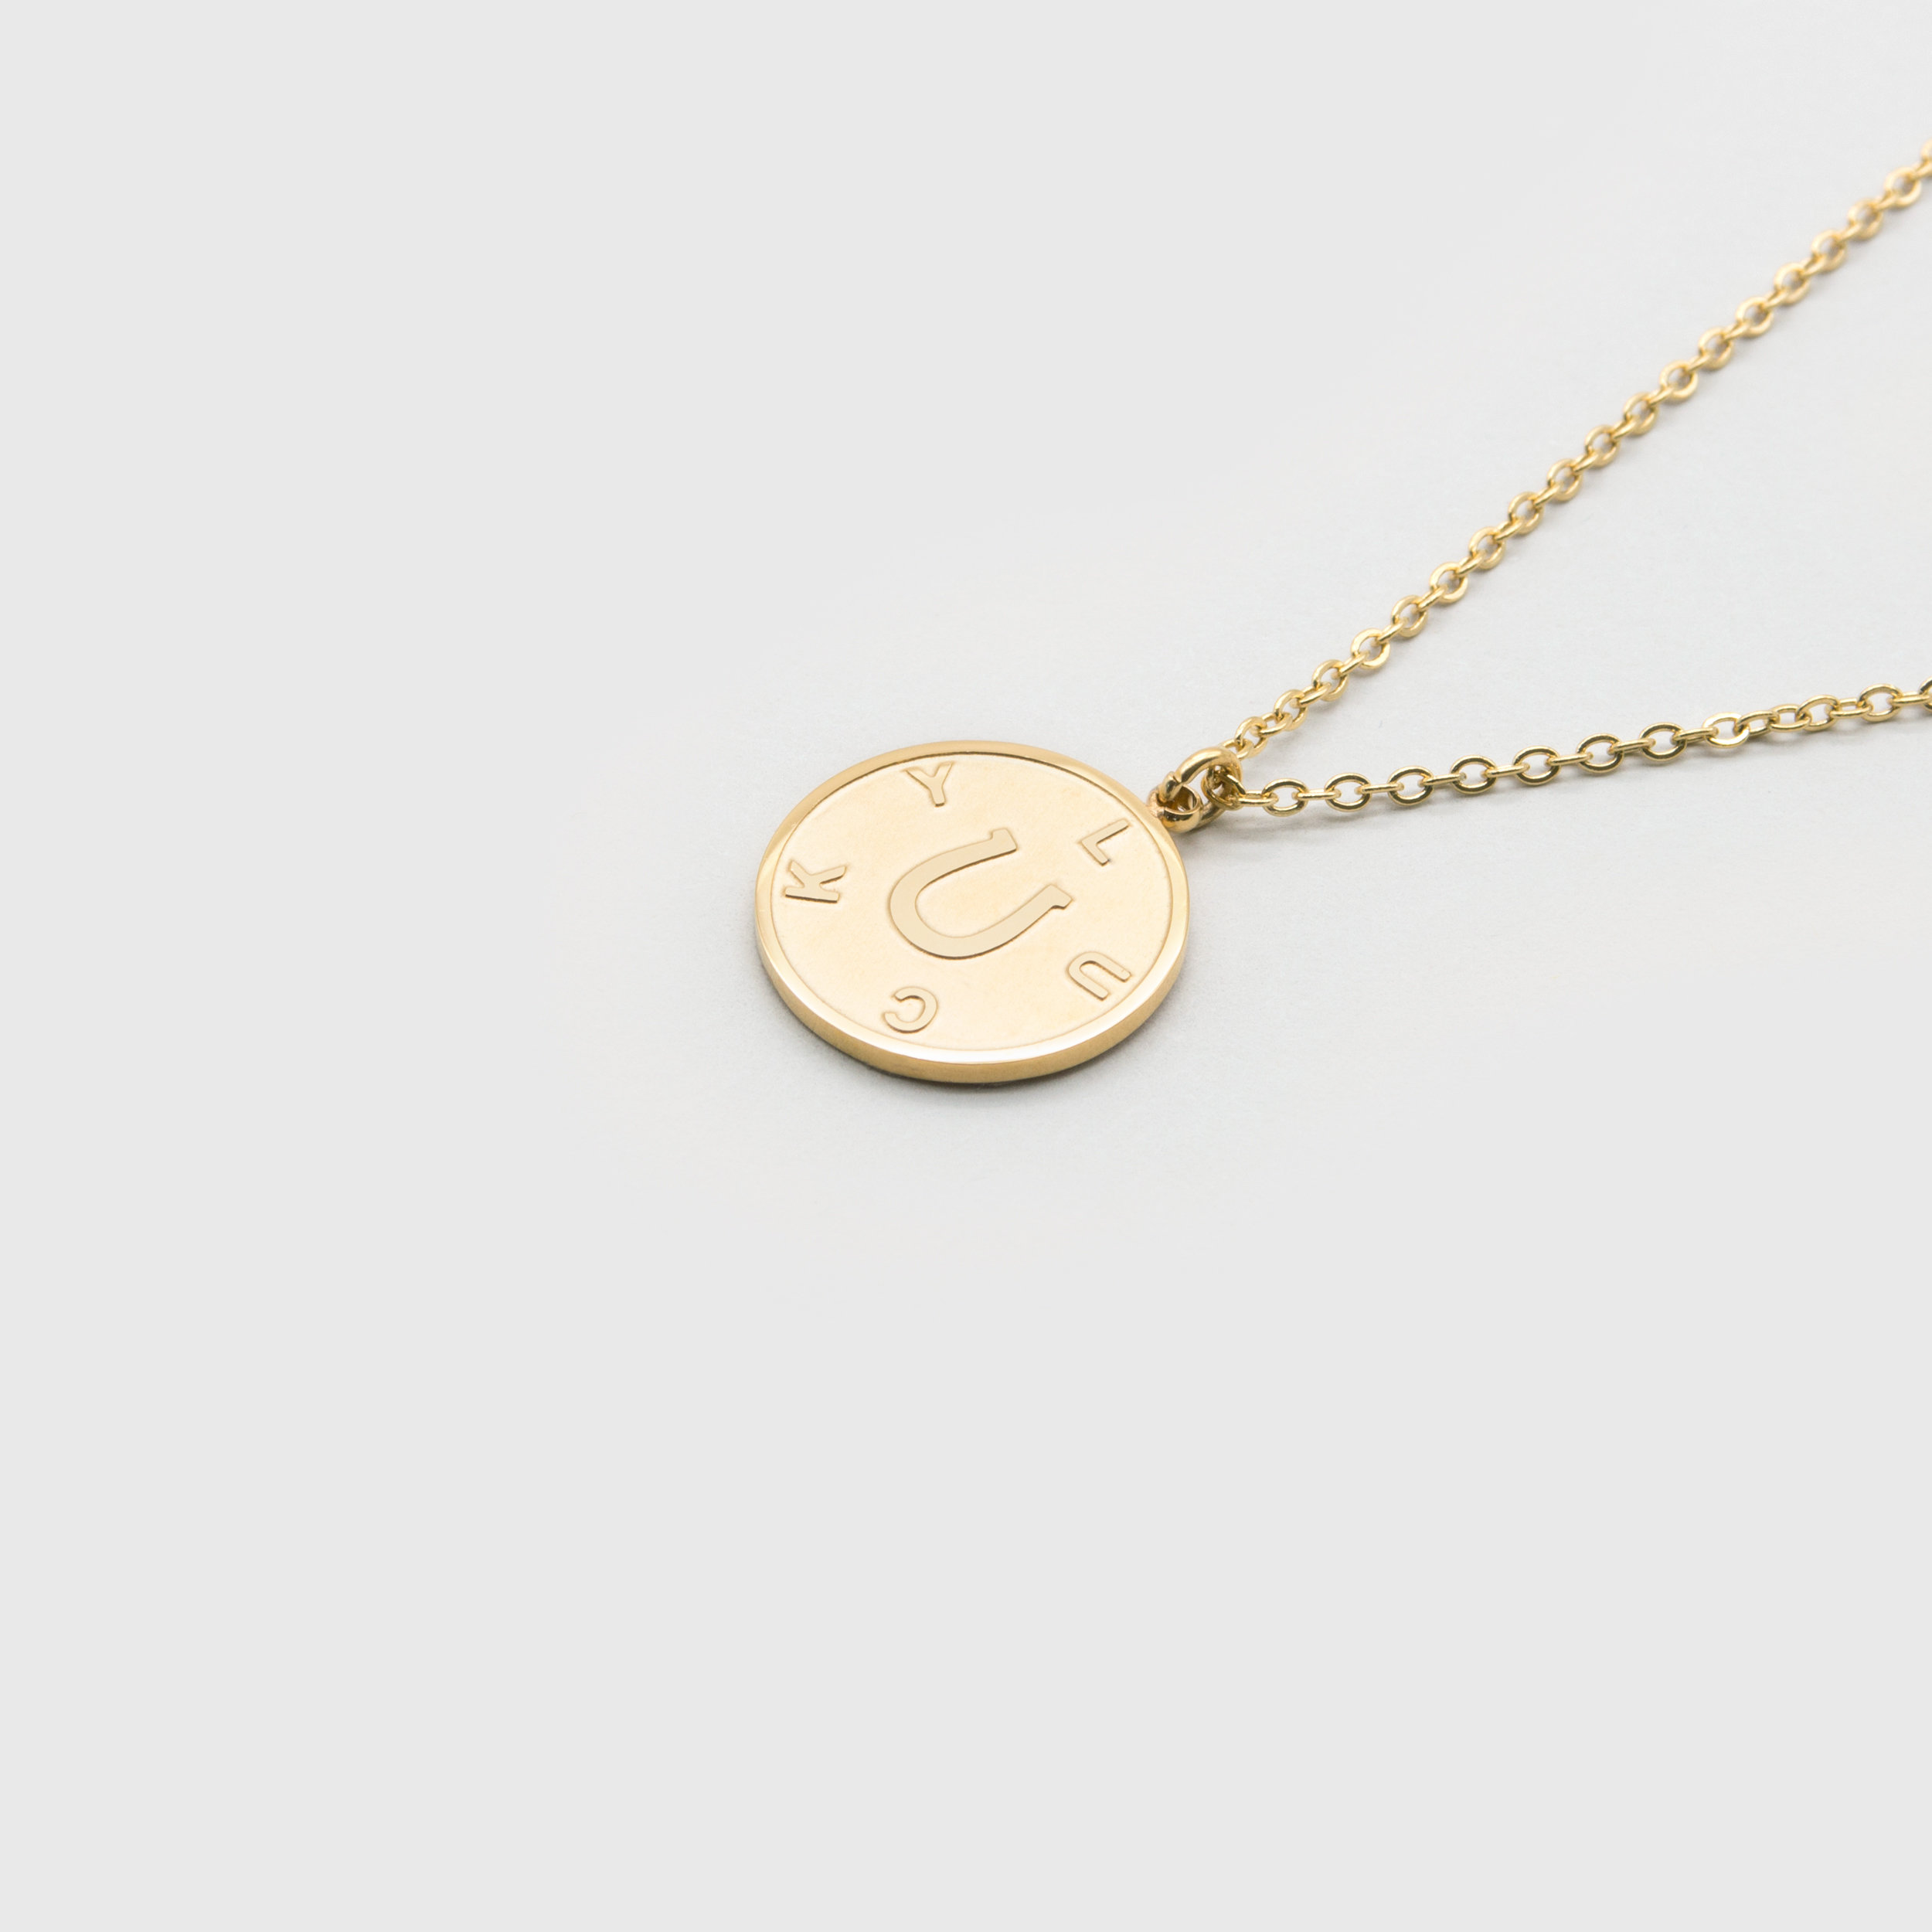 Kuku lucky gold coin necklace with horseshoe